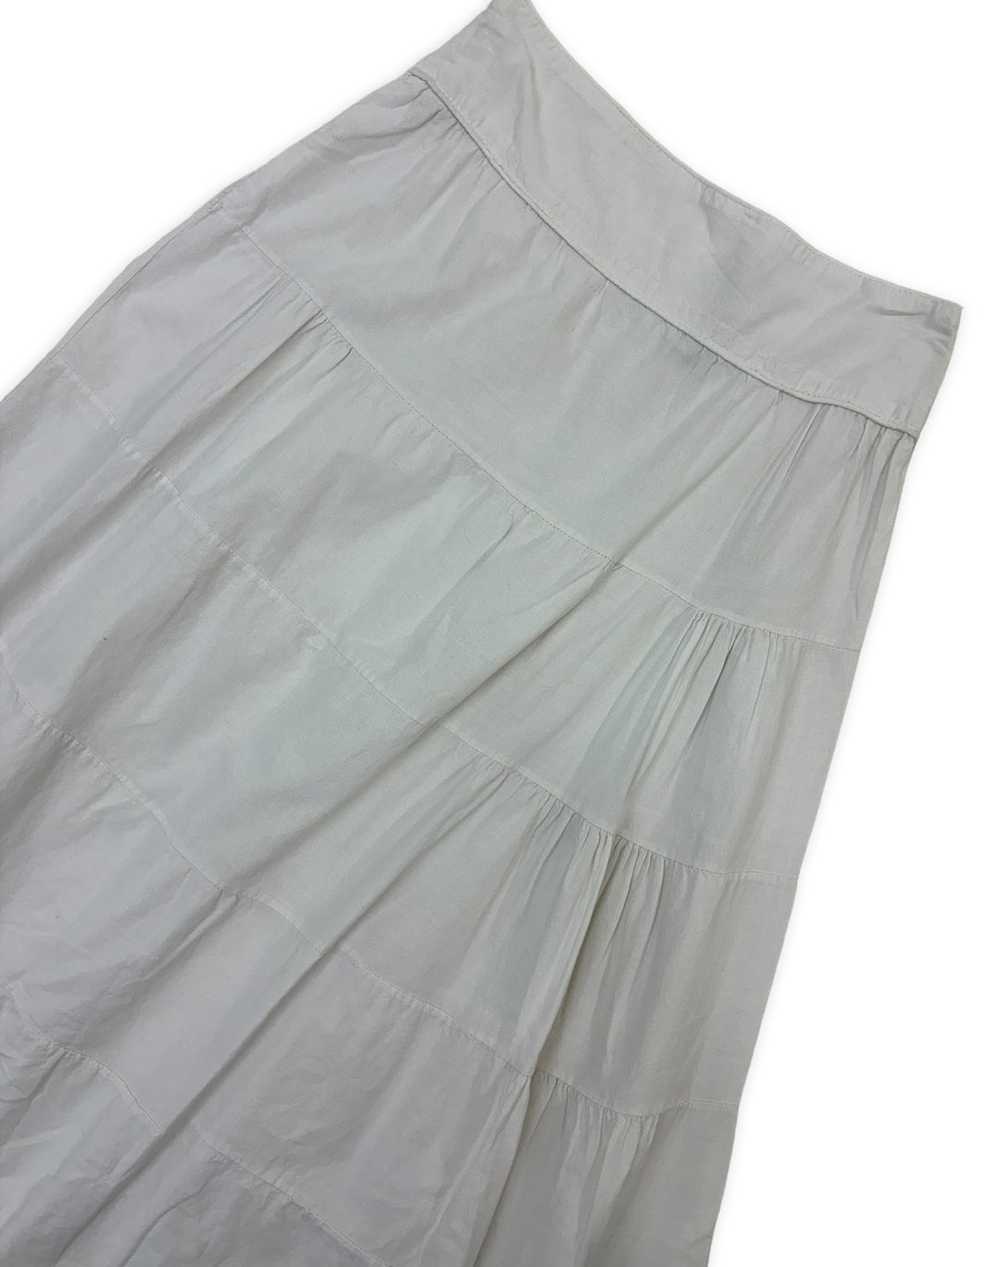 WHITE TIERED MAXI SKIRT (W30) - image 3